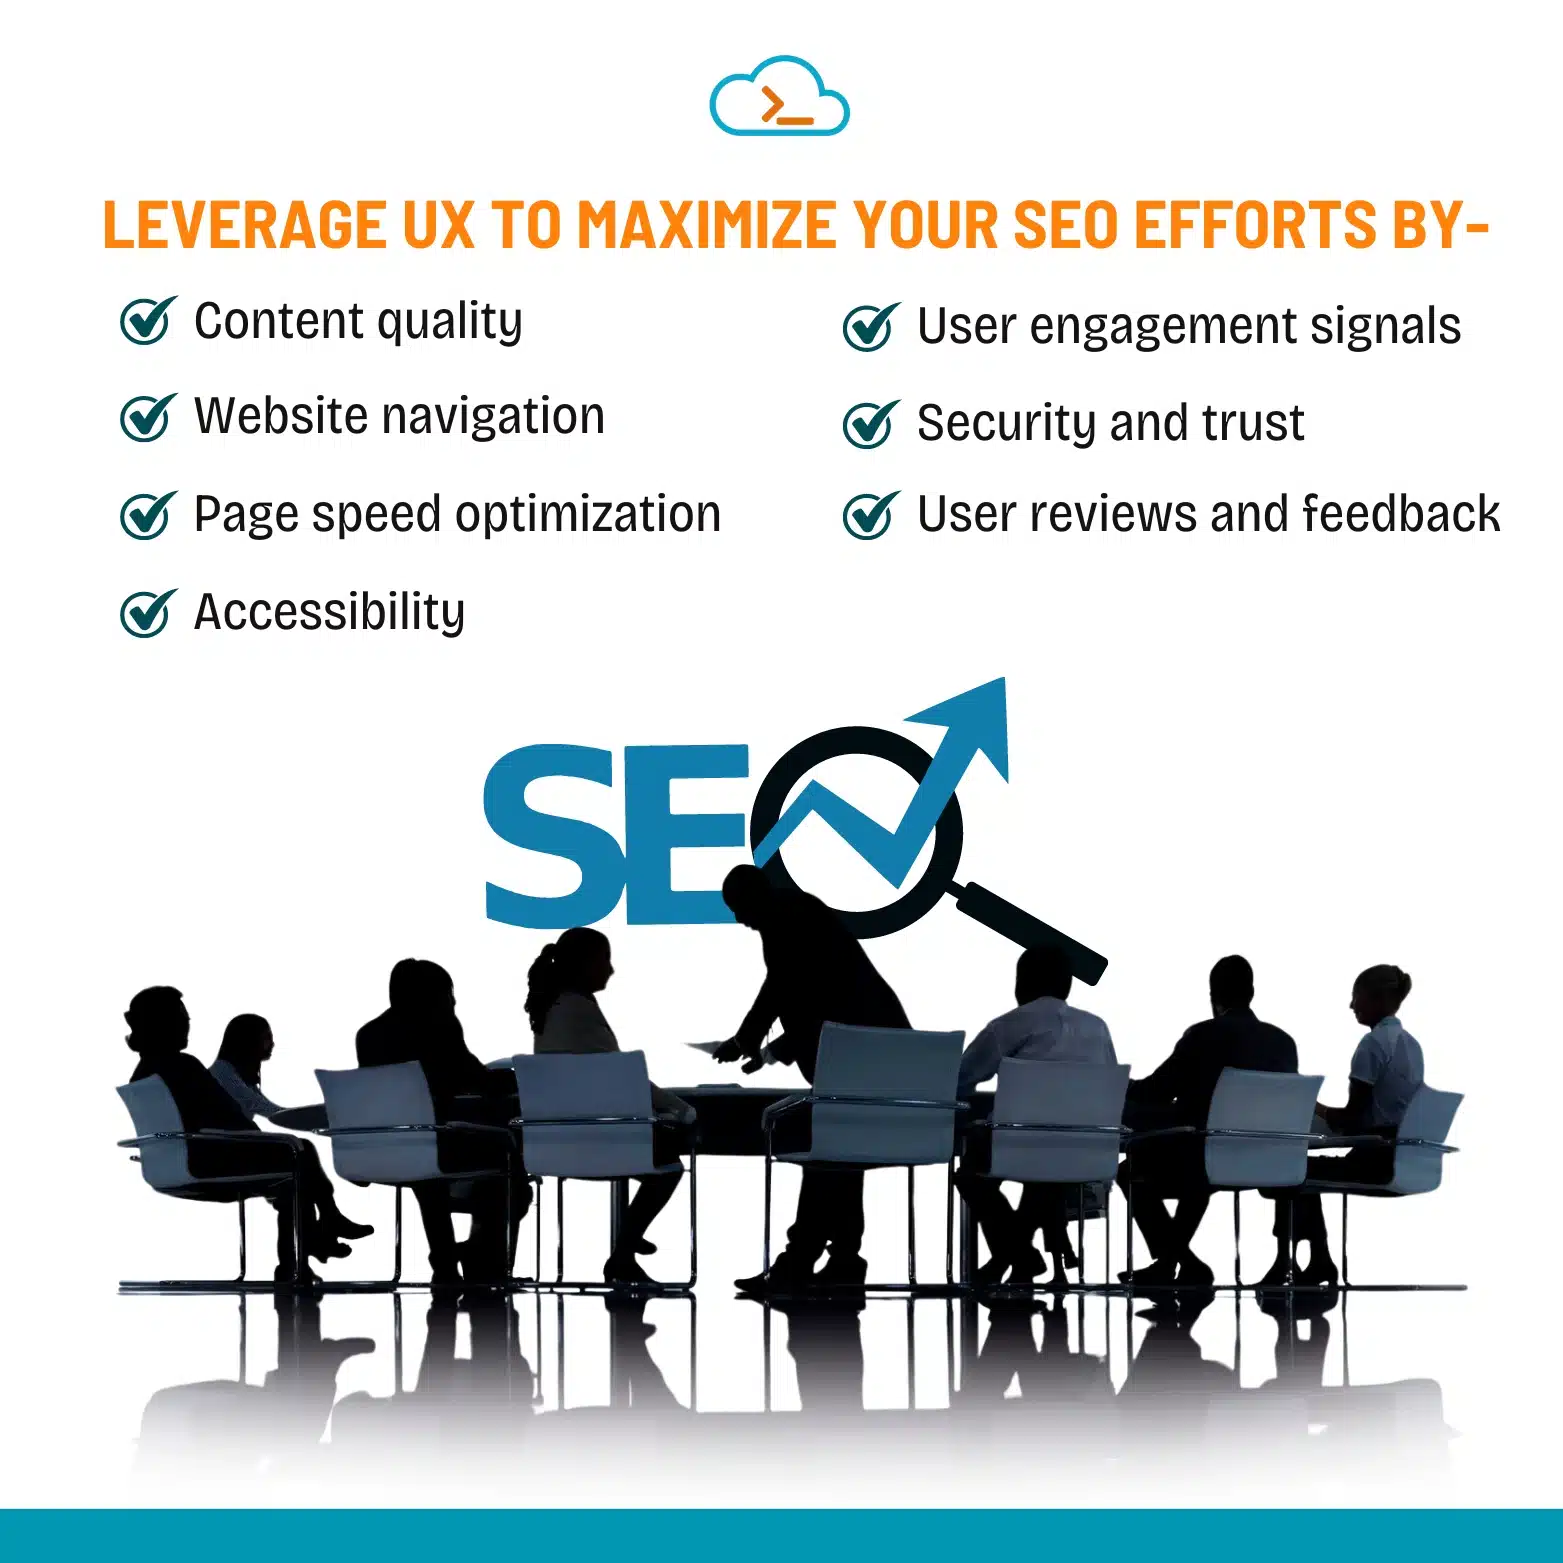 Leverage UX to maximize your SEO efforts